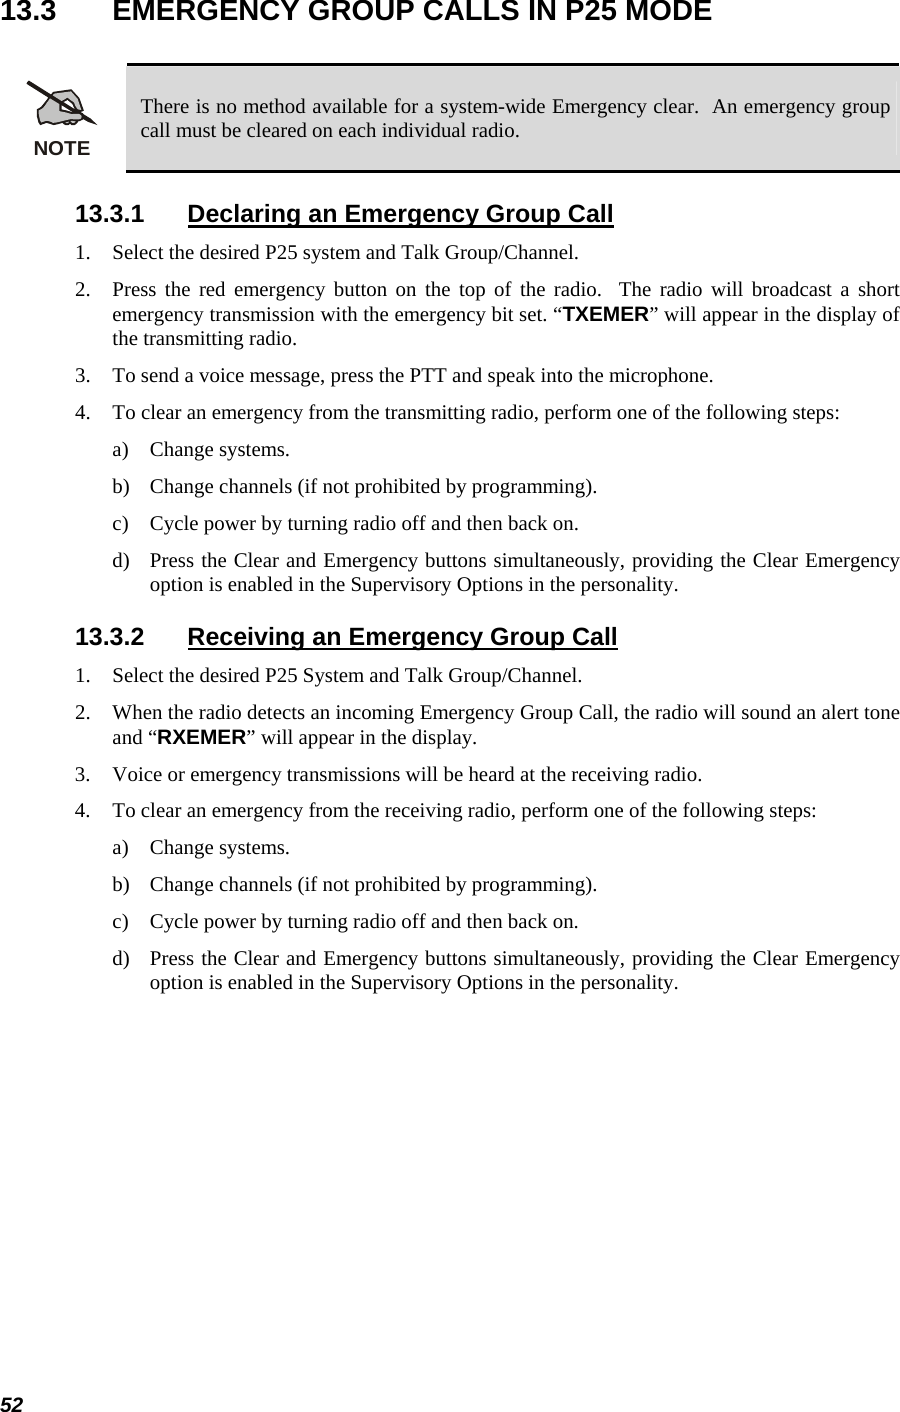  52 13.3  EMERGENCY GROUP CALLS IN P25 MODE  NOTE There is no method available for a system-wide Emergency clear.  An emergency group call must be cleared on each individual radio. 13.3.1  Declaring an Emergency Group Call 1. Select the desired P25 system and Talk Group/Channel. 2. Press the red emergency button on the top of the radio.  The radio will broadcast a short emergency transmission with the emergency bit set. “TXEMER” will appear in the display of the transmitting radio. 3. To send a voice message, press the PTT and speak into the microphone. 4. To clear an emergency from the transmitting radio, perform one of the following steps: a) Change systems. b) Change channels (if not prohibited by programming). c) Cycle power by turning radio off and then back on. d) Press the Clear and Emergency buttons simultaneously, providing the Clear Emergency option is enabled in the Supervisory Options in the personality. 13.3.2  Receiving an Emergency Group Call 1. Select the desired P25 System and Talk Group/Channel. 2. When the radio detects an incoming Emergency Group Call, the radio will sound an alert tone and “RXEMER” will appear in the display. 3. Voice or emergency transmissions will be heard at the receiving radio. 4. To clear an emergency from the receiving radio, perform one of the following steps: a) Change systems. b) Change channels (if not prohibited by programming). c) Cycle power by turning radio off and then back on.  d) Press the Clear and Emergency buttons simultaneously, providing the Clear Emergency option is enabled in the Supervisory Options in the personality. 